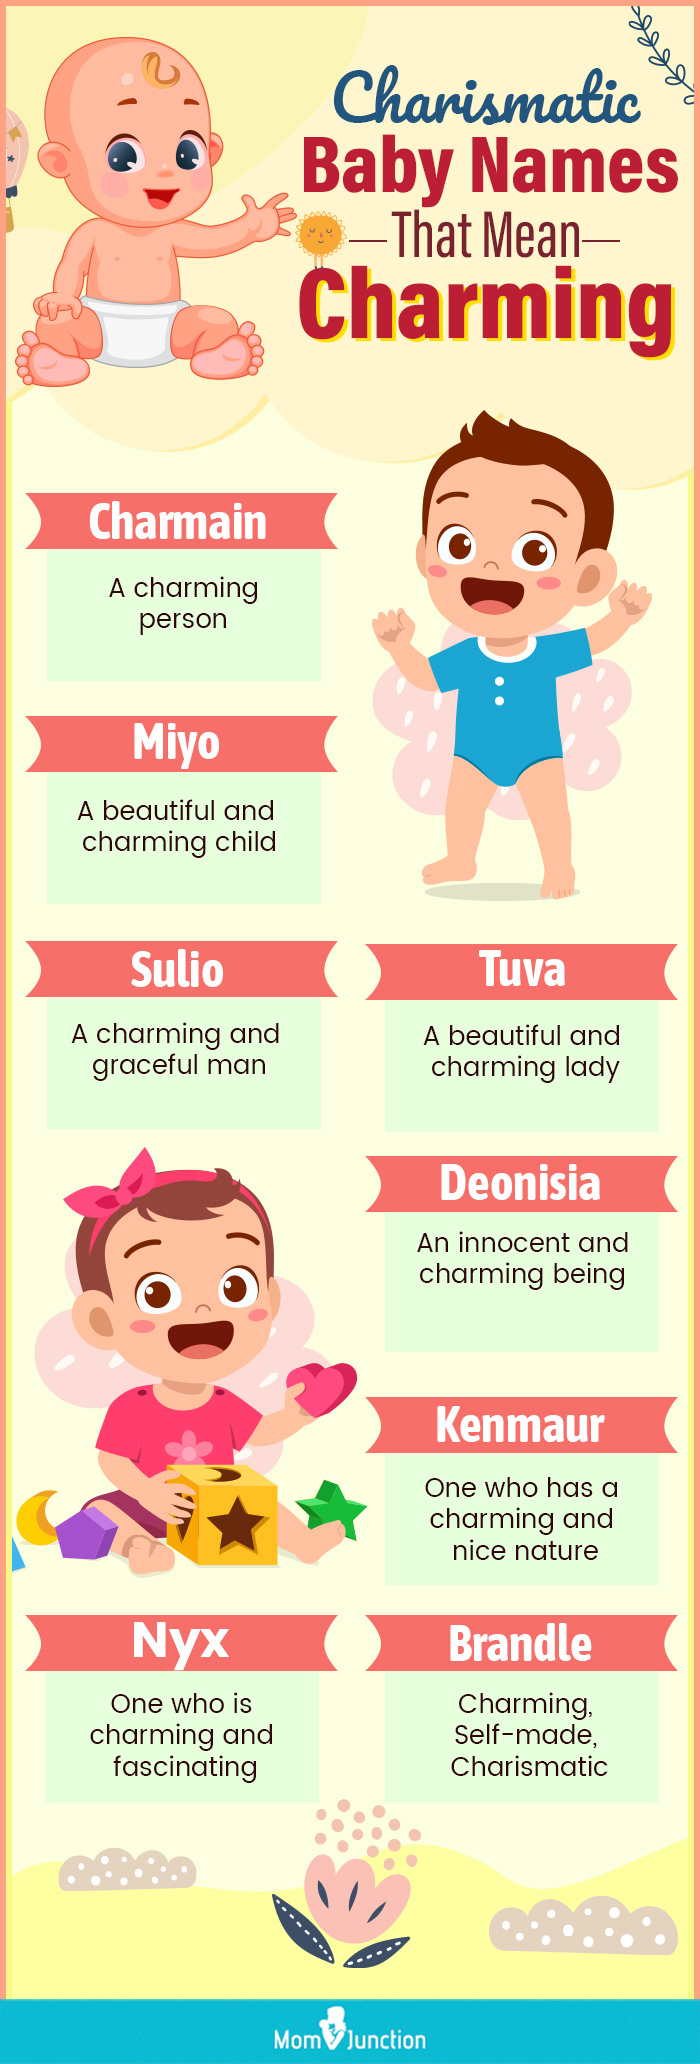 charismatic baby names that mean charming (infographic)